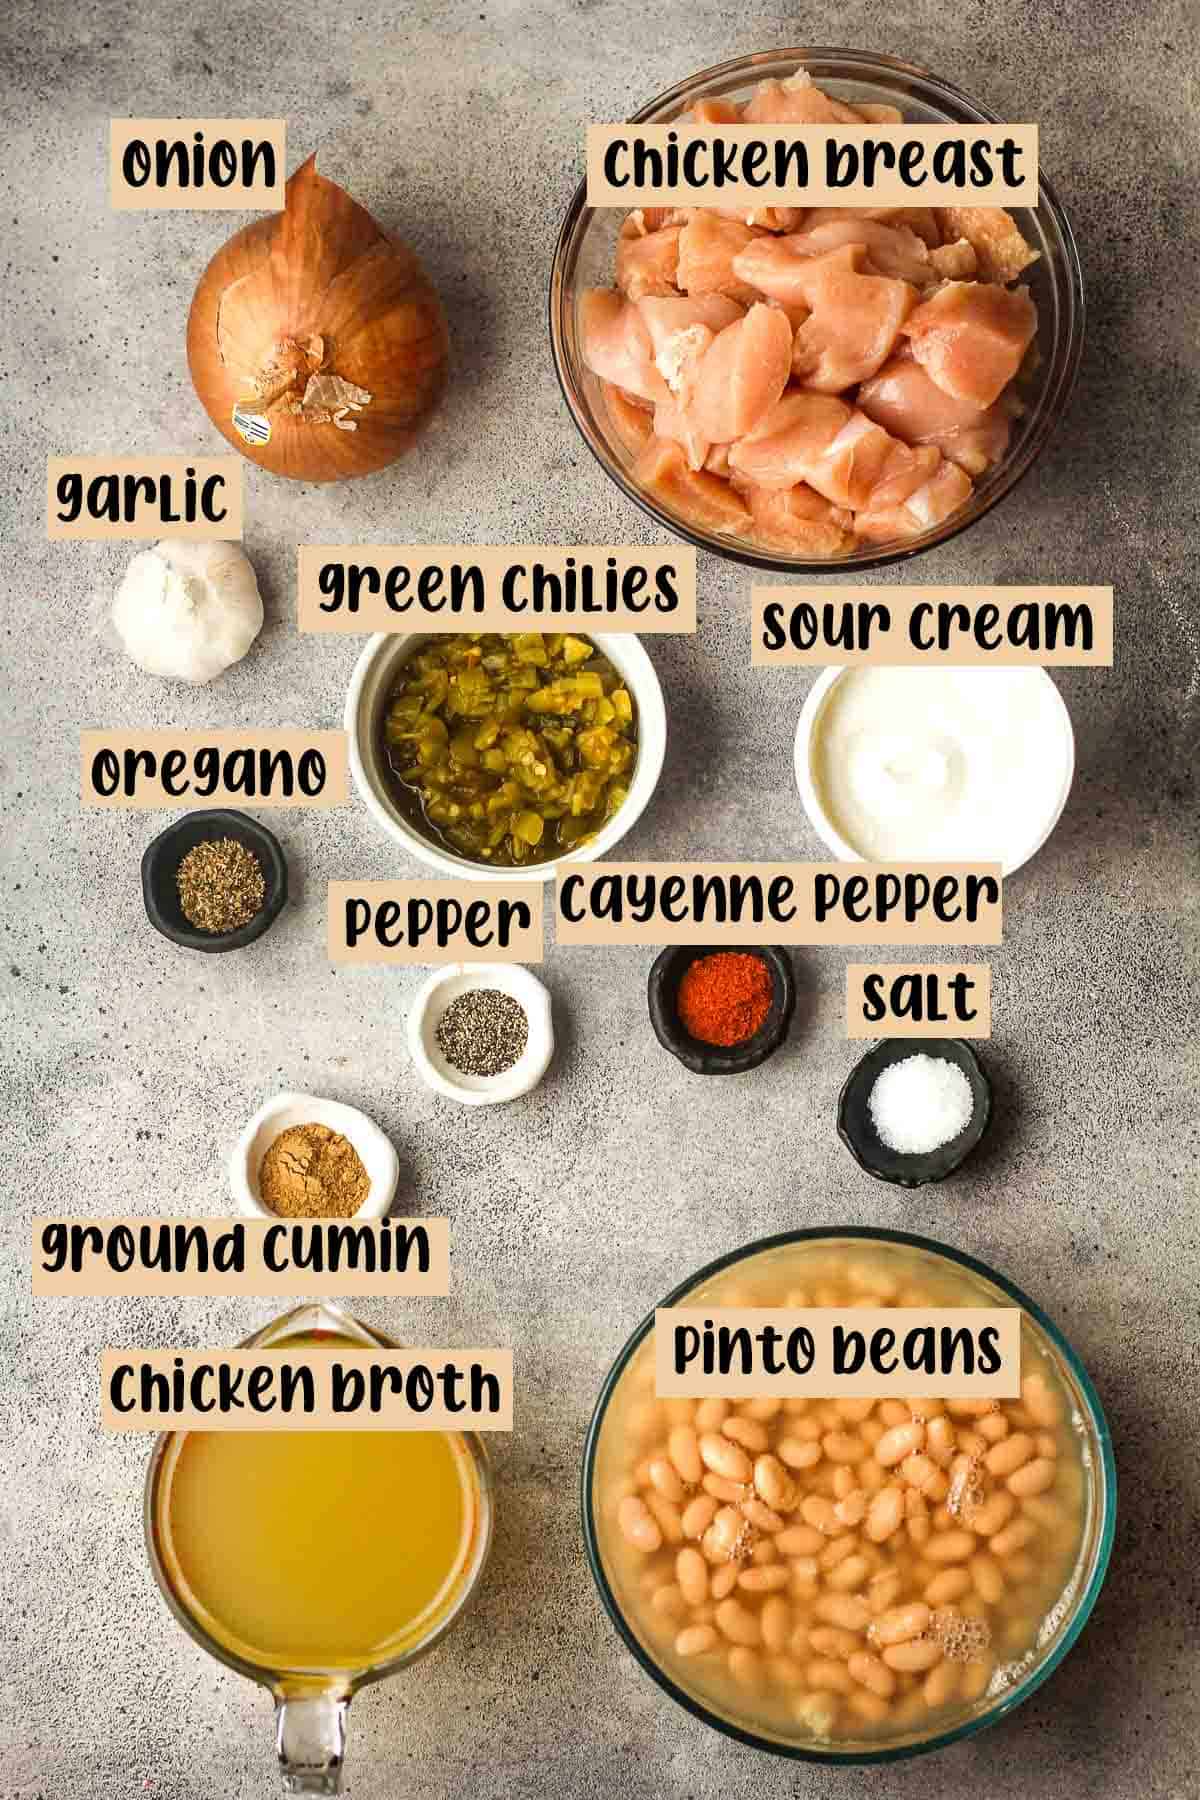 Labeled ingredients for the southwestern chicken chili.